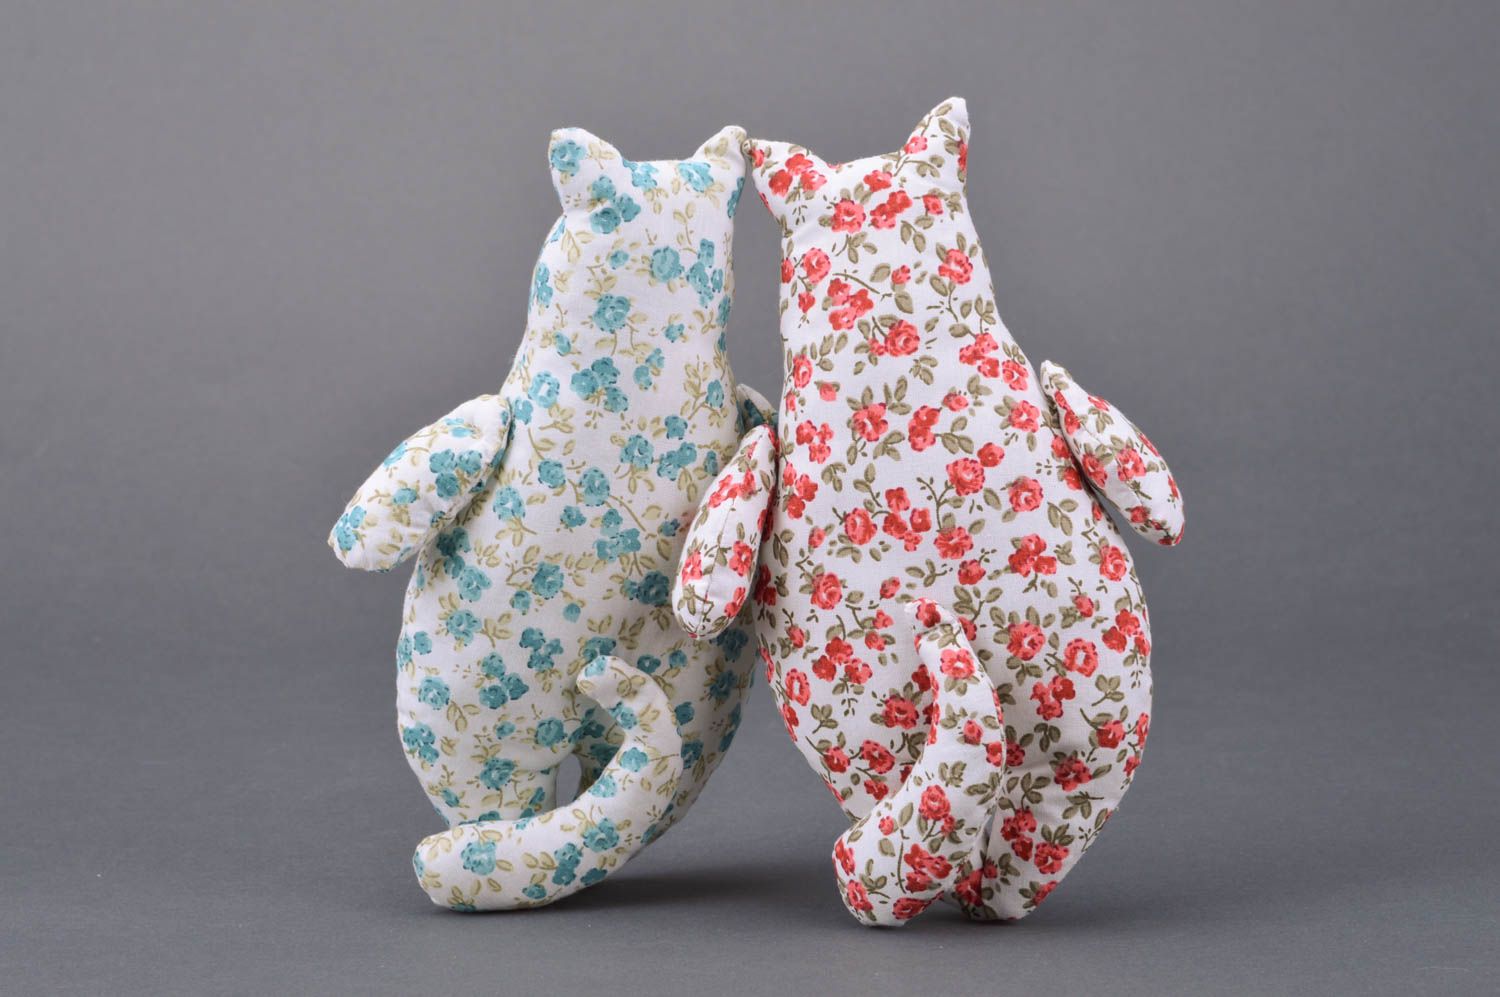 Handmade set of fabric toys 2 pieces made of cotton with flower pattern photo 5